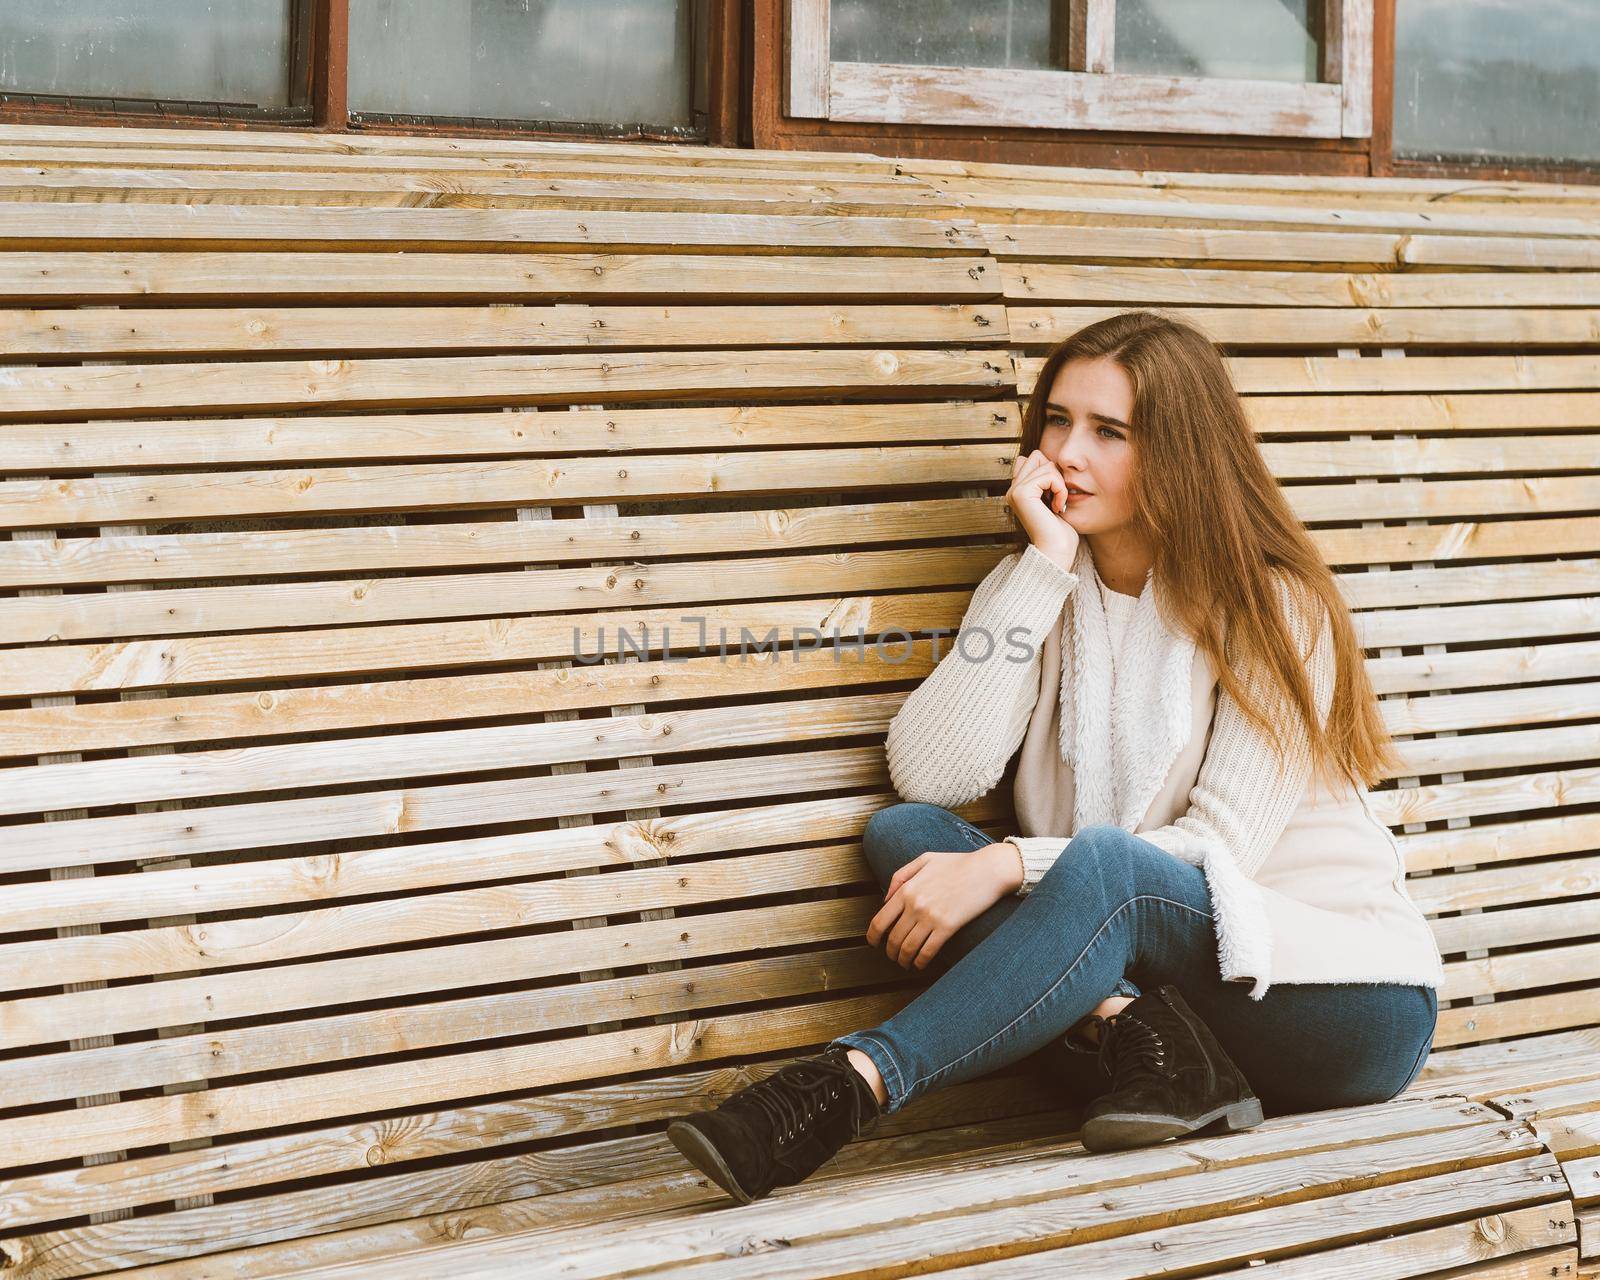 Beautiful young girl with long brown hair sits on wooden bench made of planks and rests, relaxes and reflects. Outdoor photo shoot with attractive woman in winter or autumn by NataBene